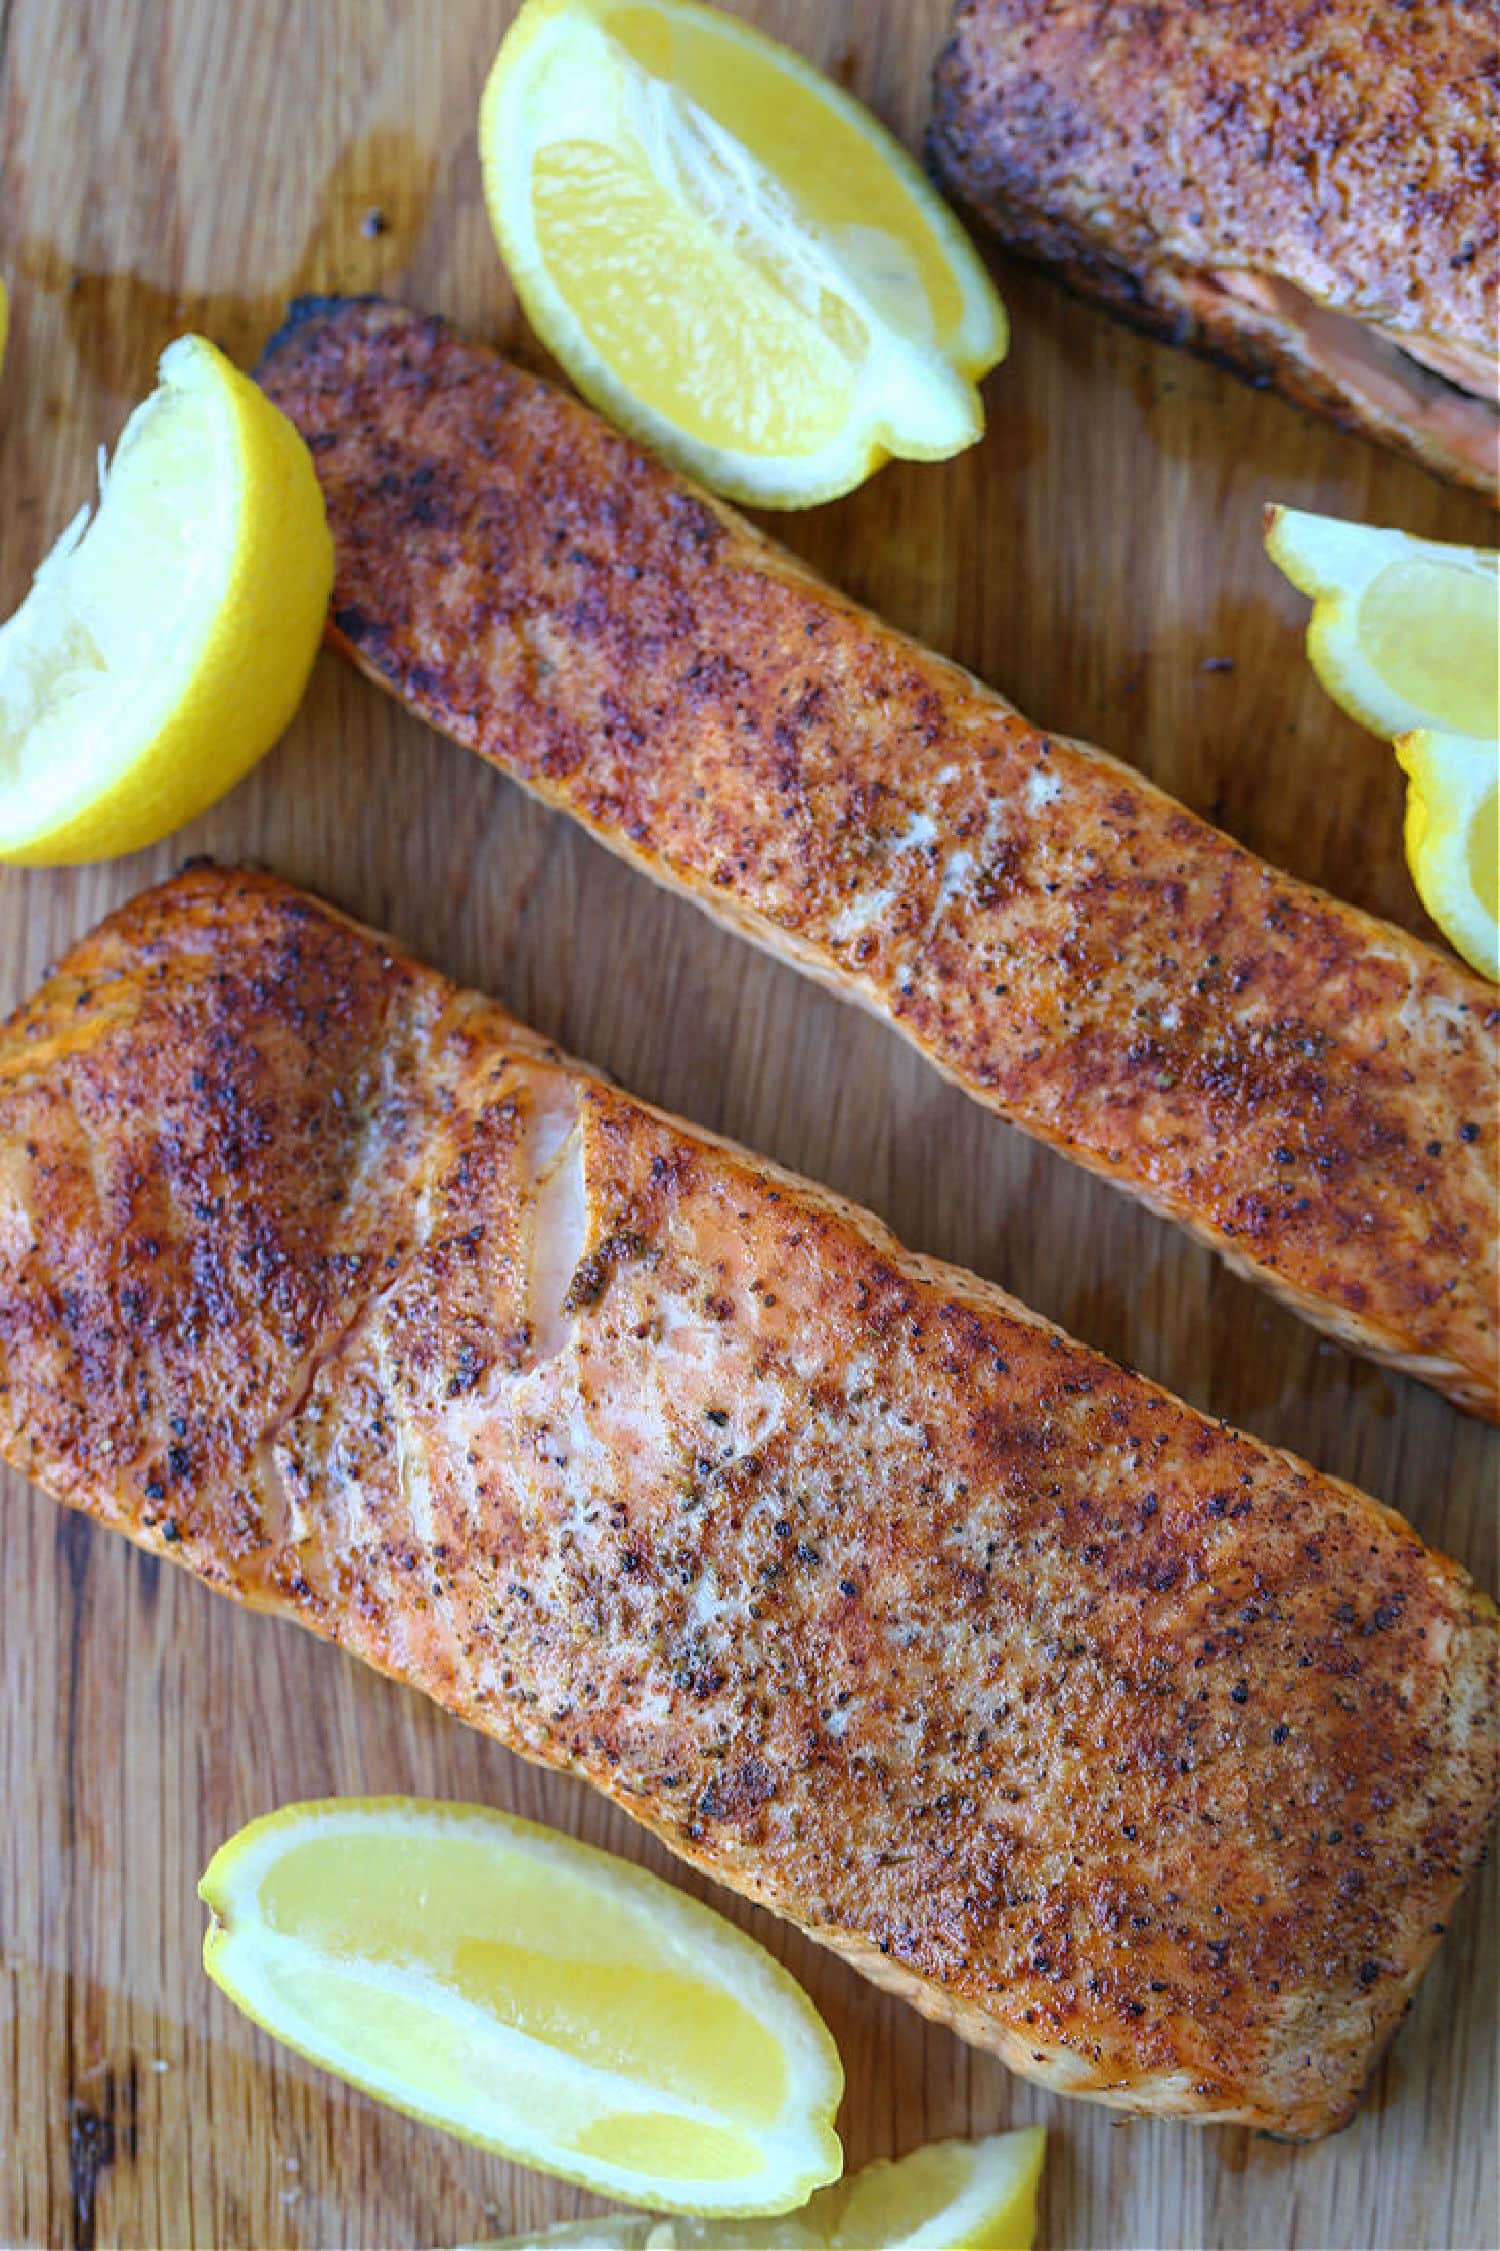 cooked salmon on board with lemons